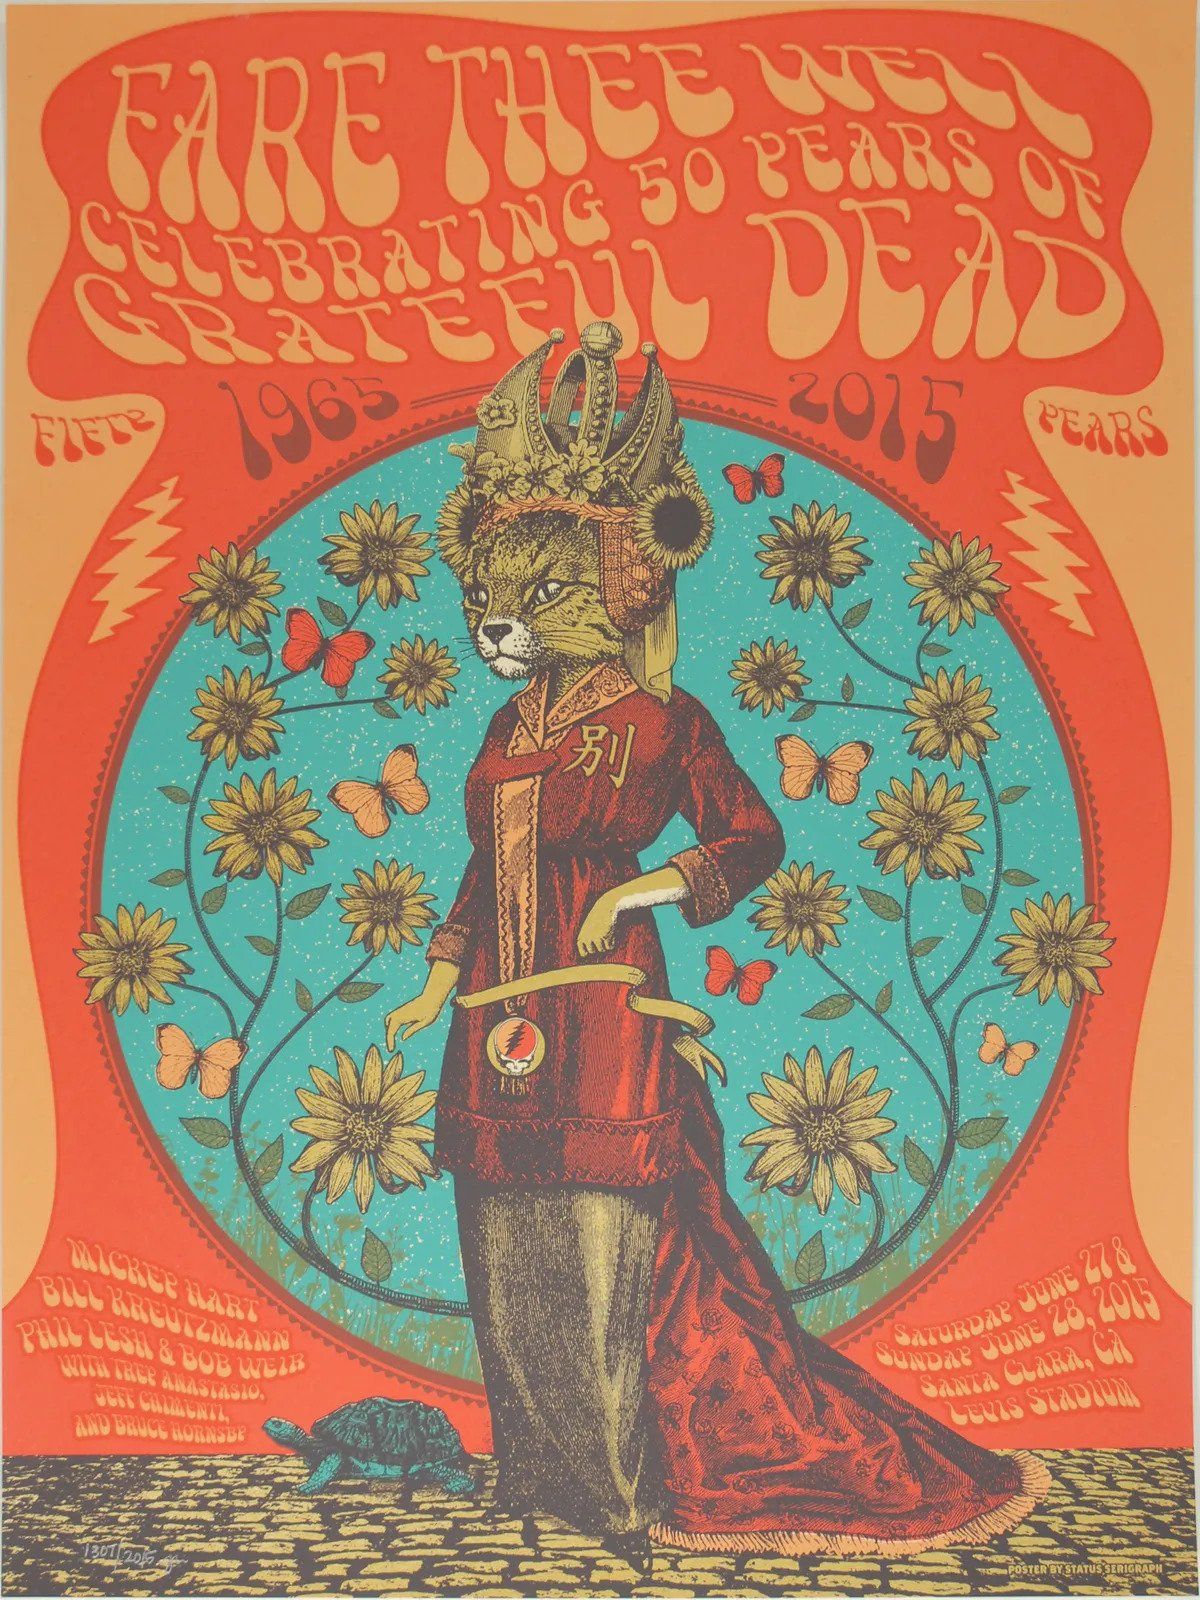 Fare Thee Well: Celebrating 50 Years of the Grateful Dead 2015 Concert Poster